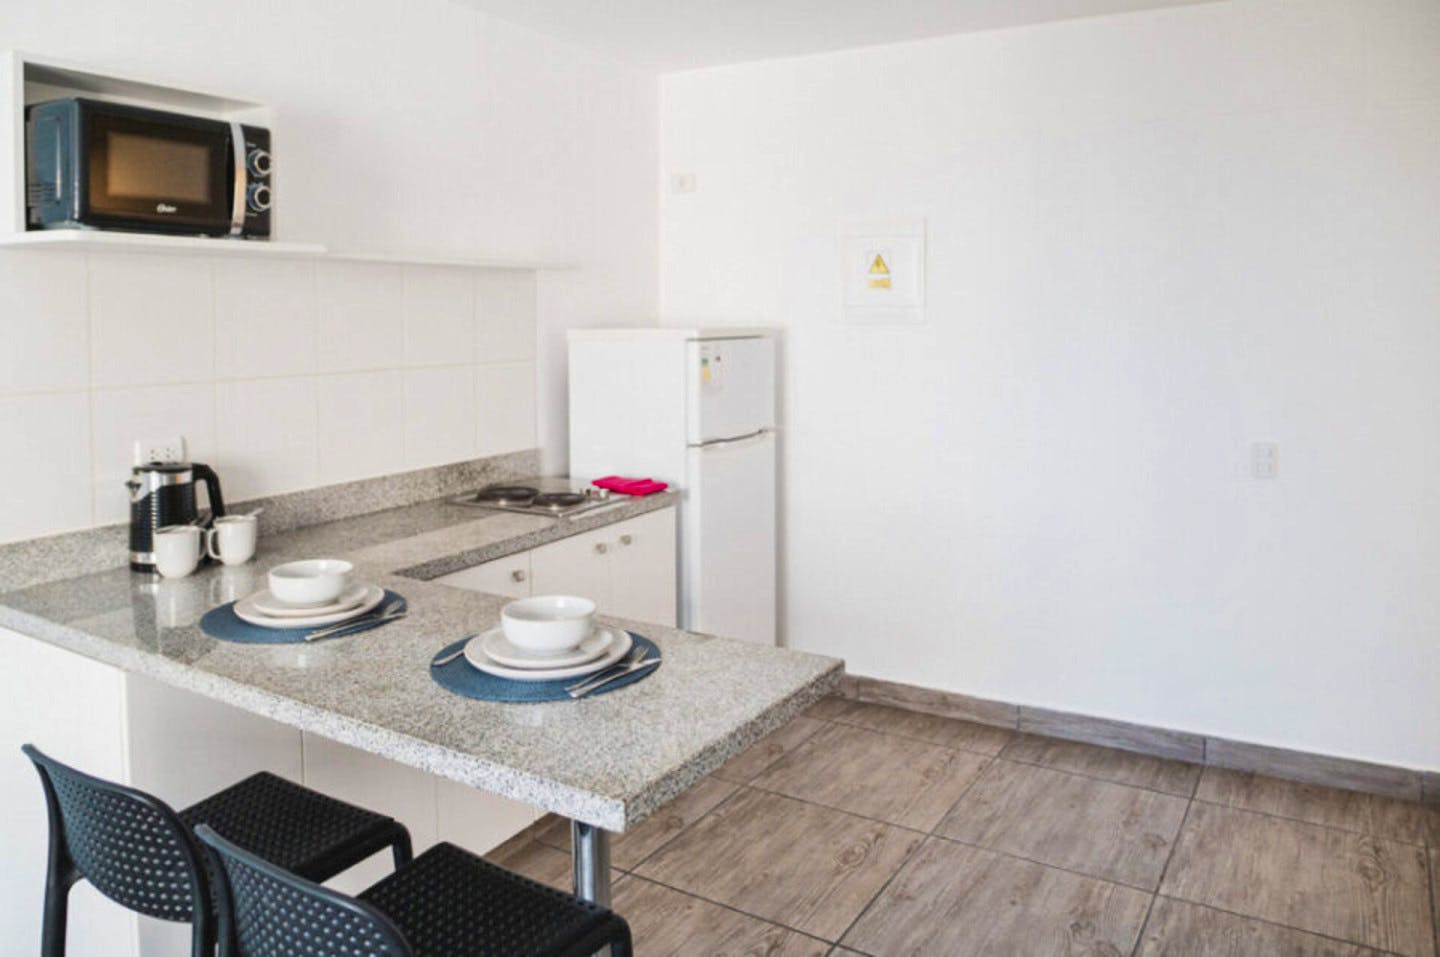 Charming Apartments one block away from Universidad Católica, close to plaza San Miguel